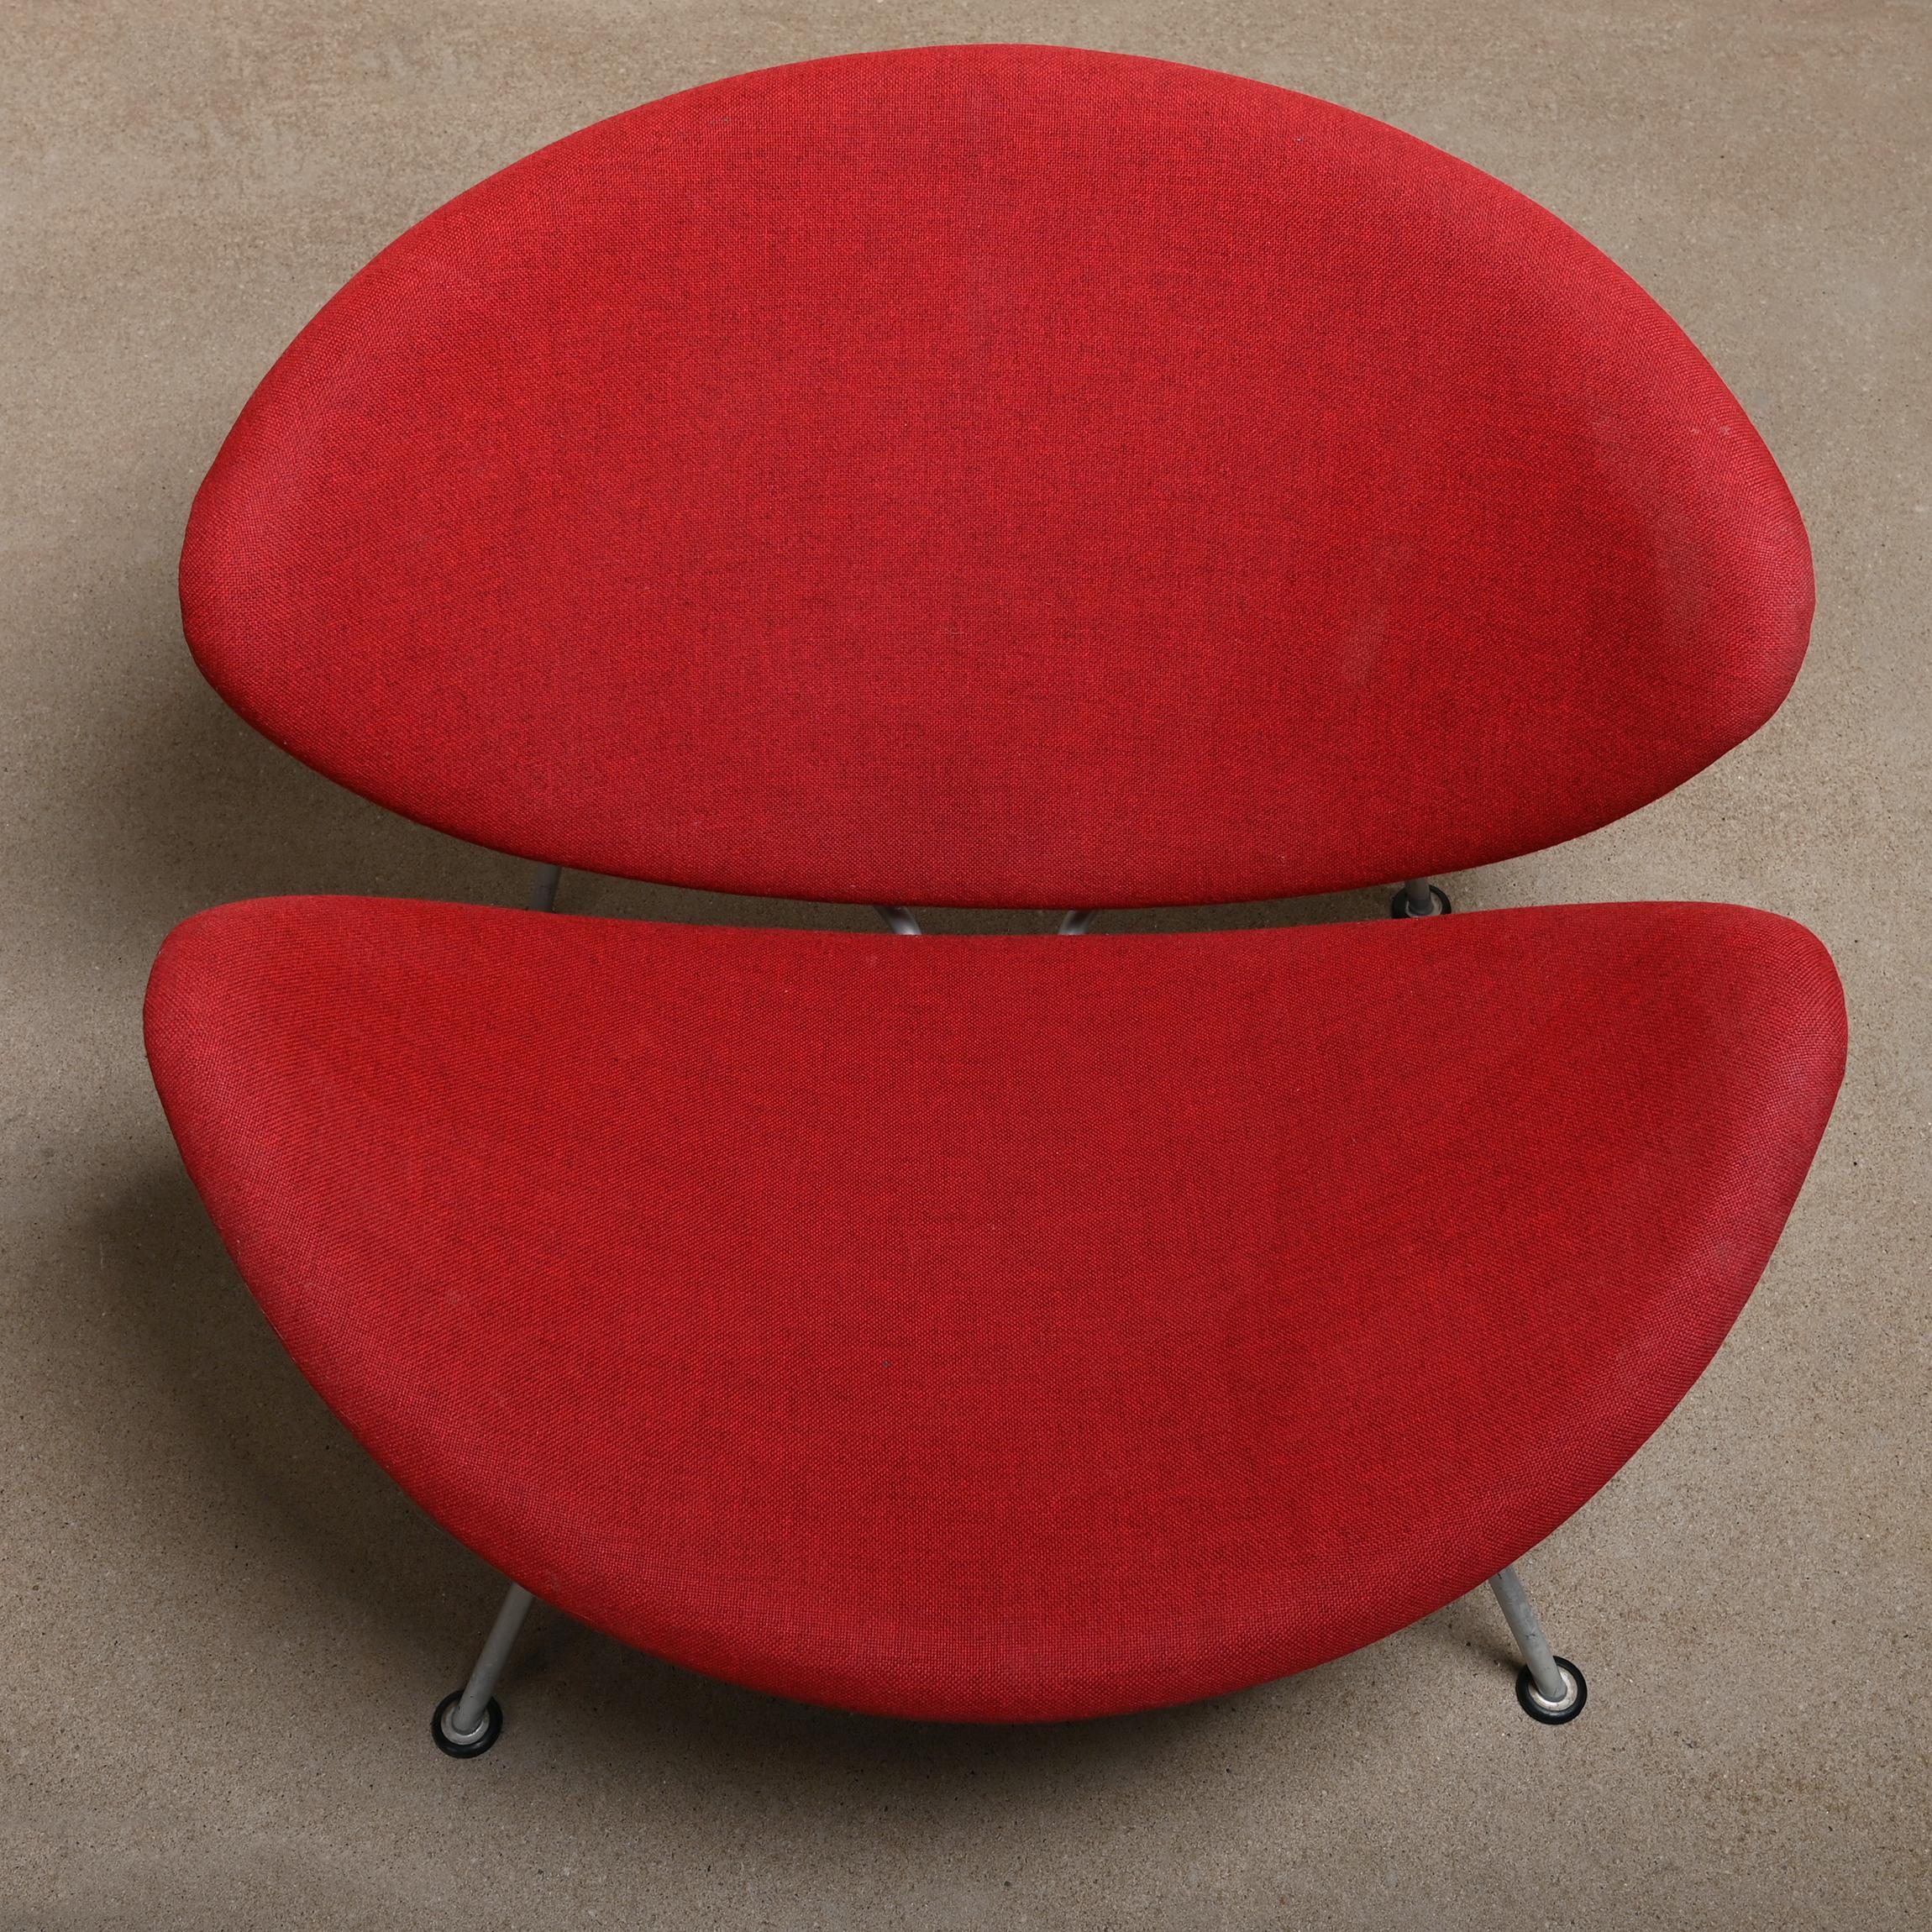 Metal Early Pierre Paulin 'Orange Slice' Chair in Red Fabric by Artifort, Netherlands For Sale